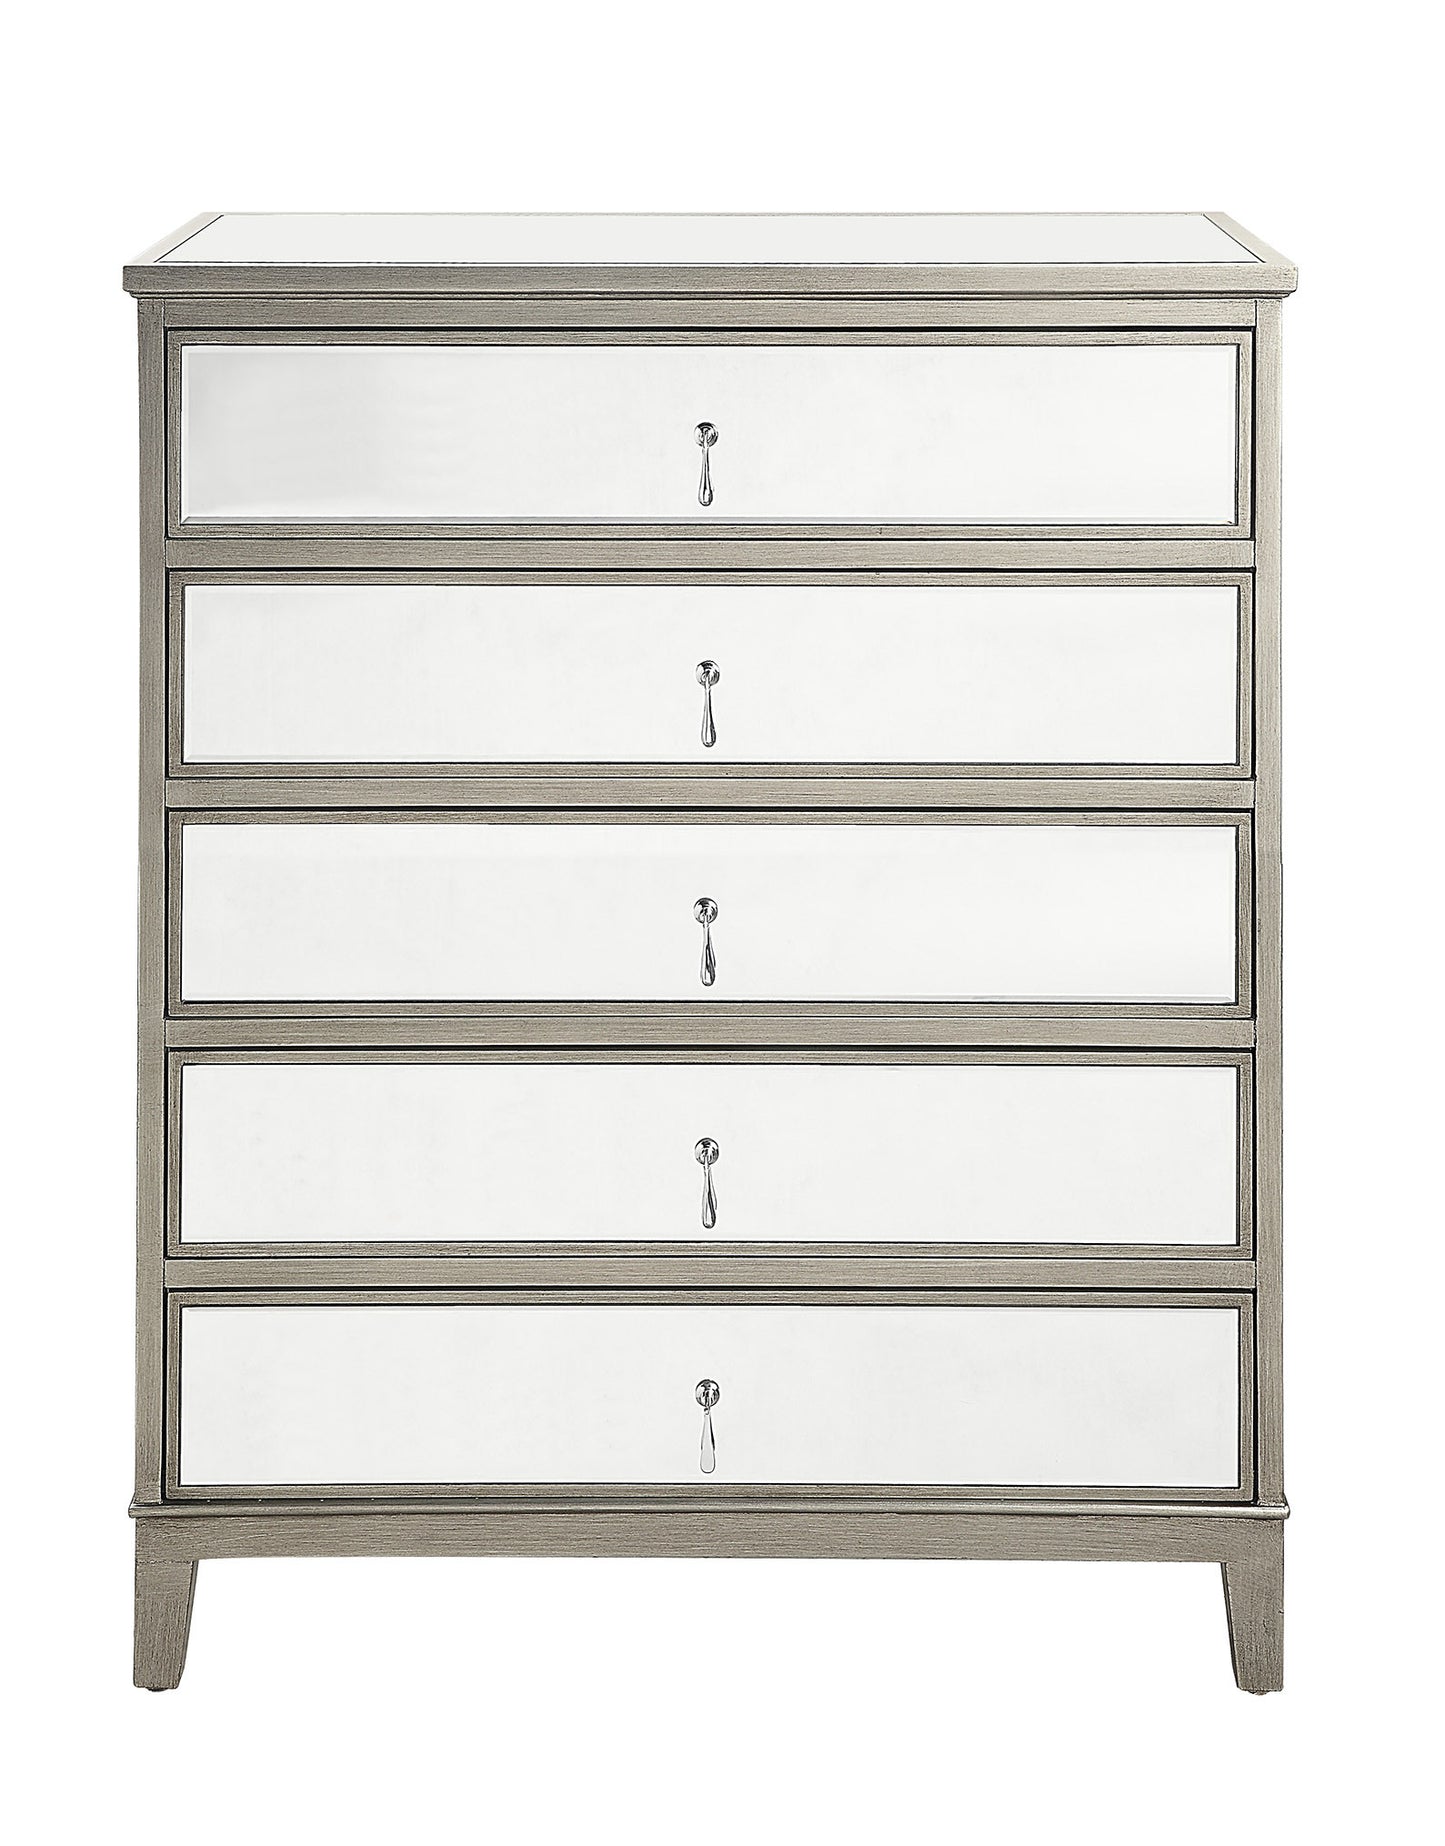 GATSBY Mirrored Tallboy Antique Brushed Silver